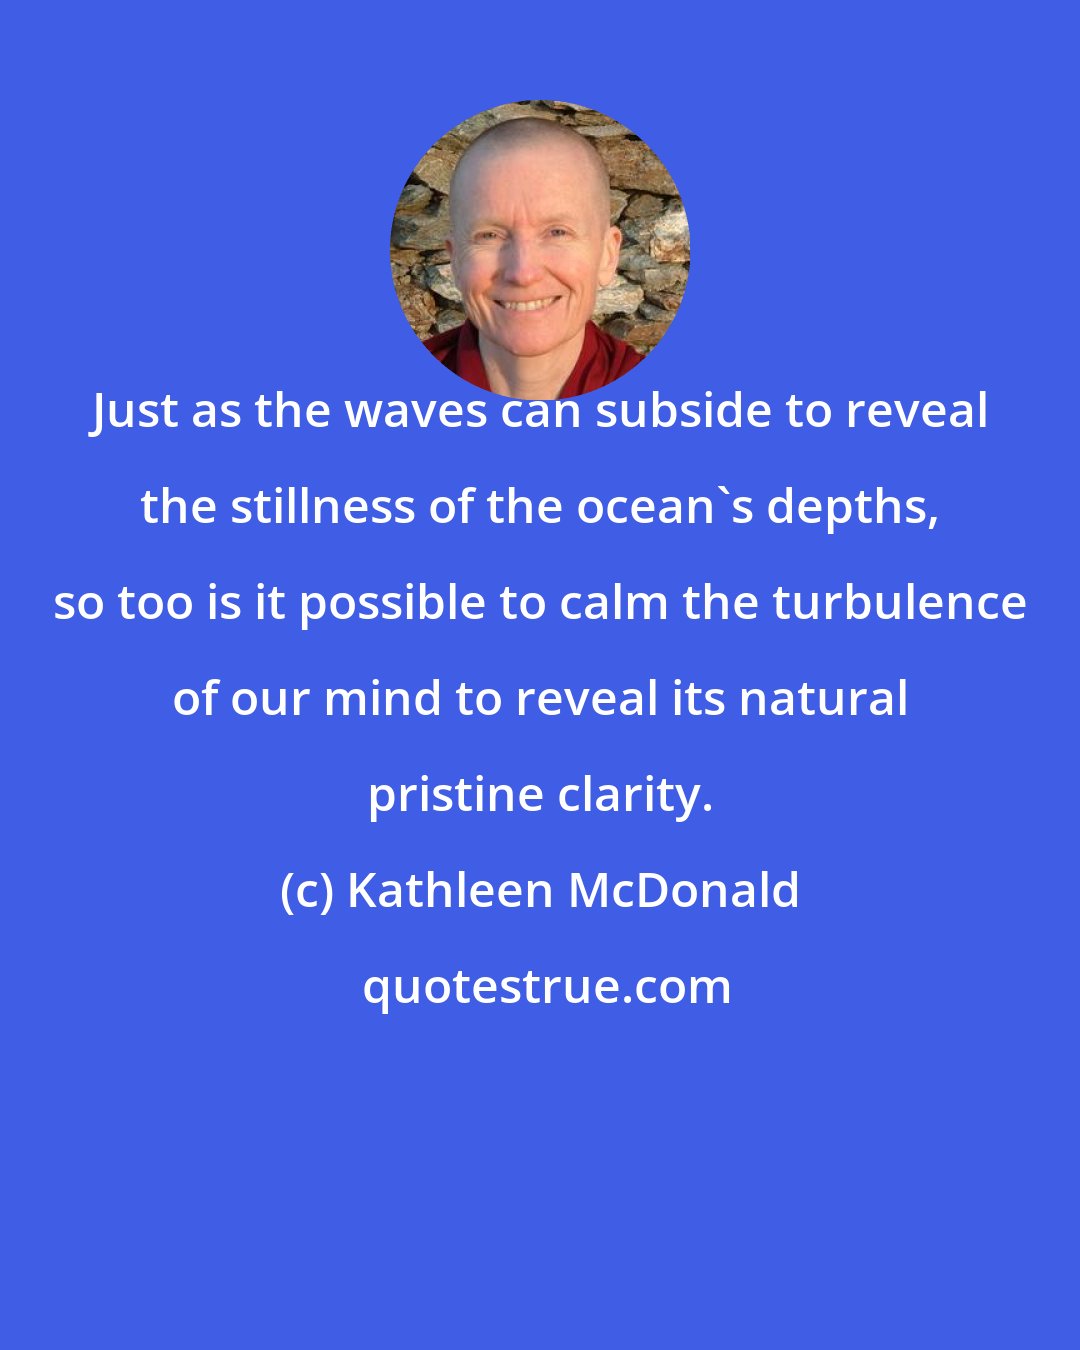 Kathleen McDonald: Just as the waves can subside to reveal the stillness of the ocean's depths, so too is it possible to calm the turbulence of our mind to reveal its natural pristine clarity.